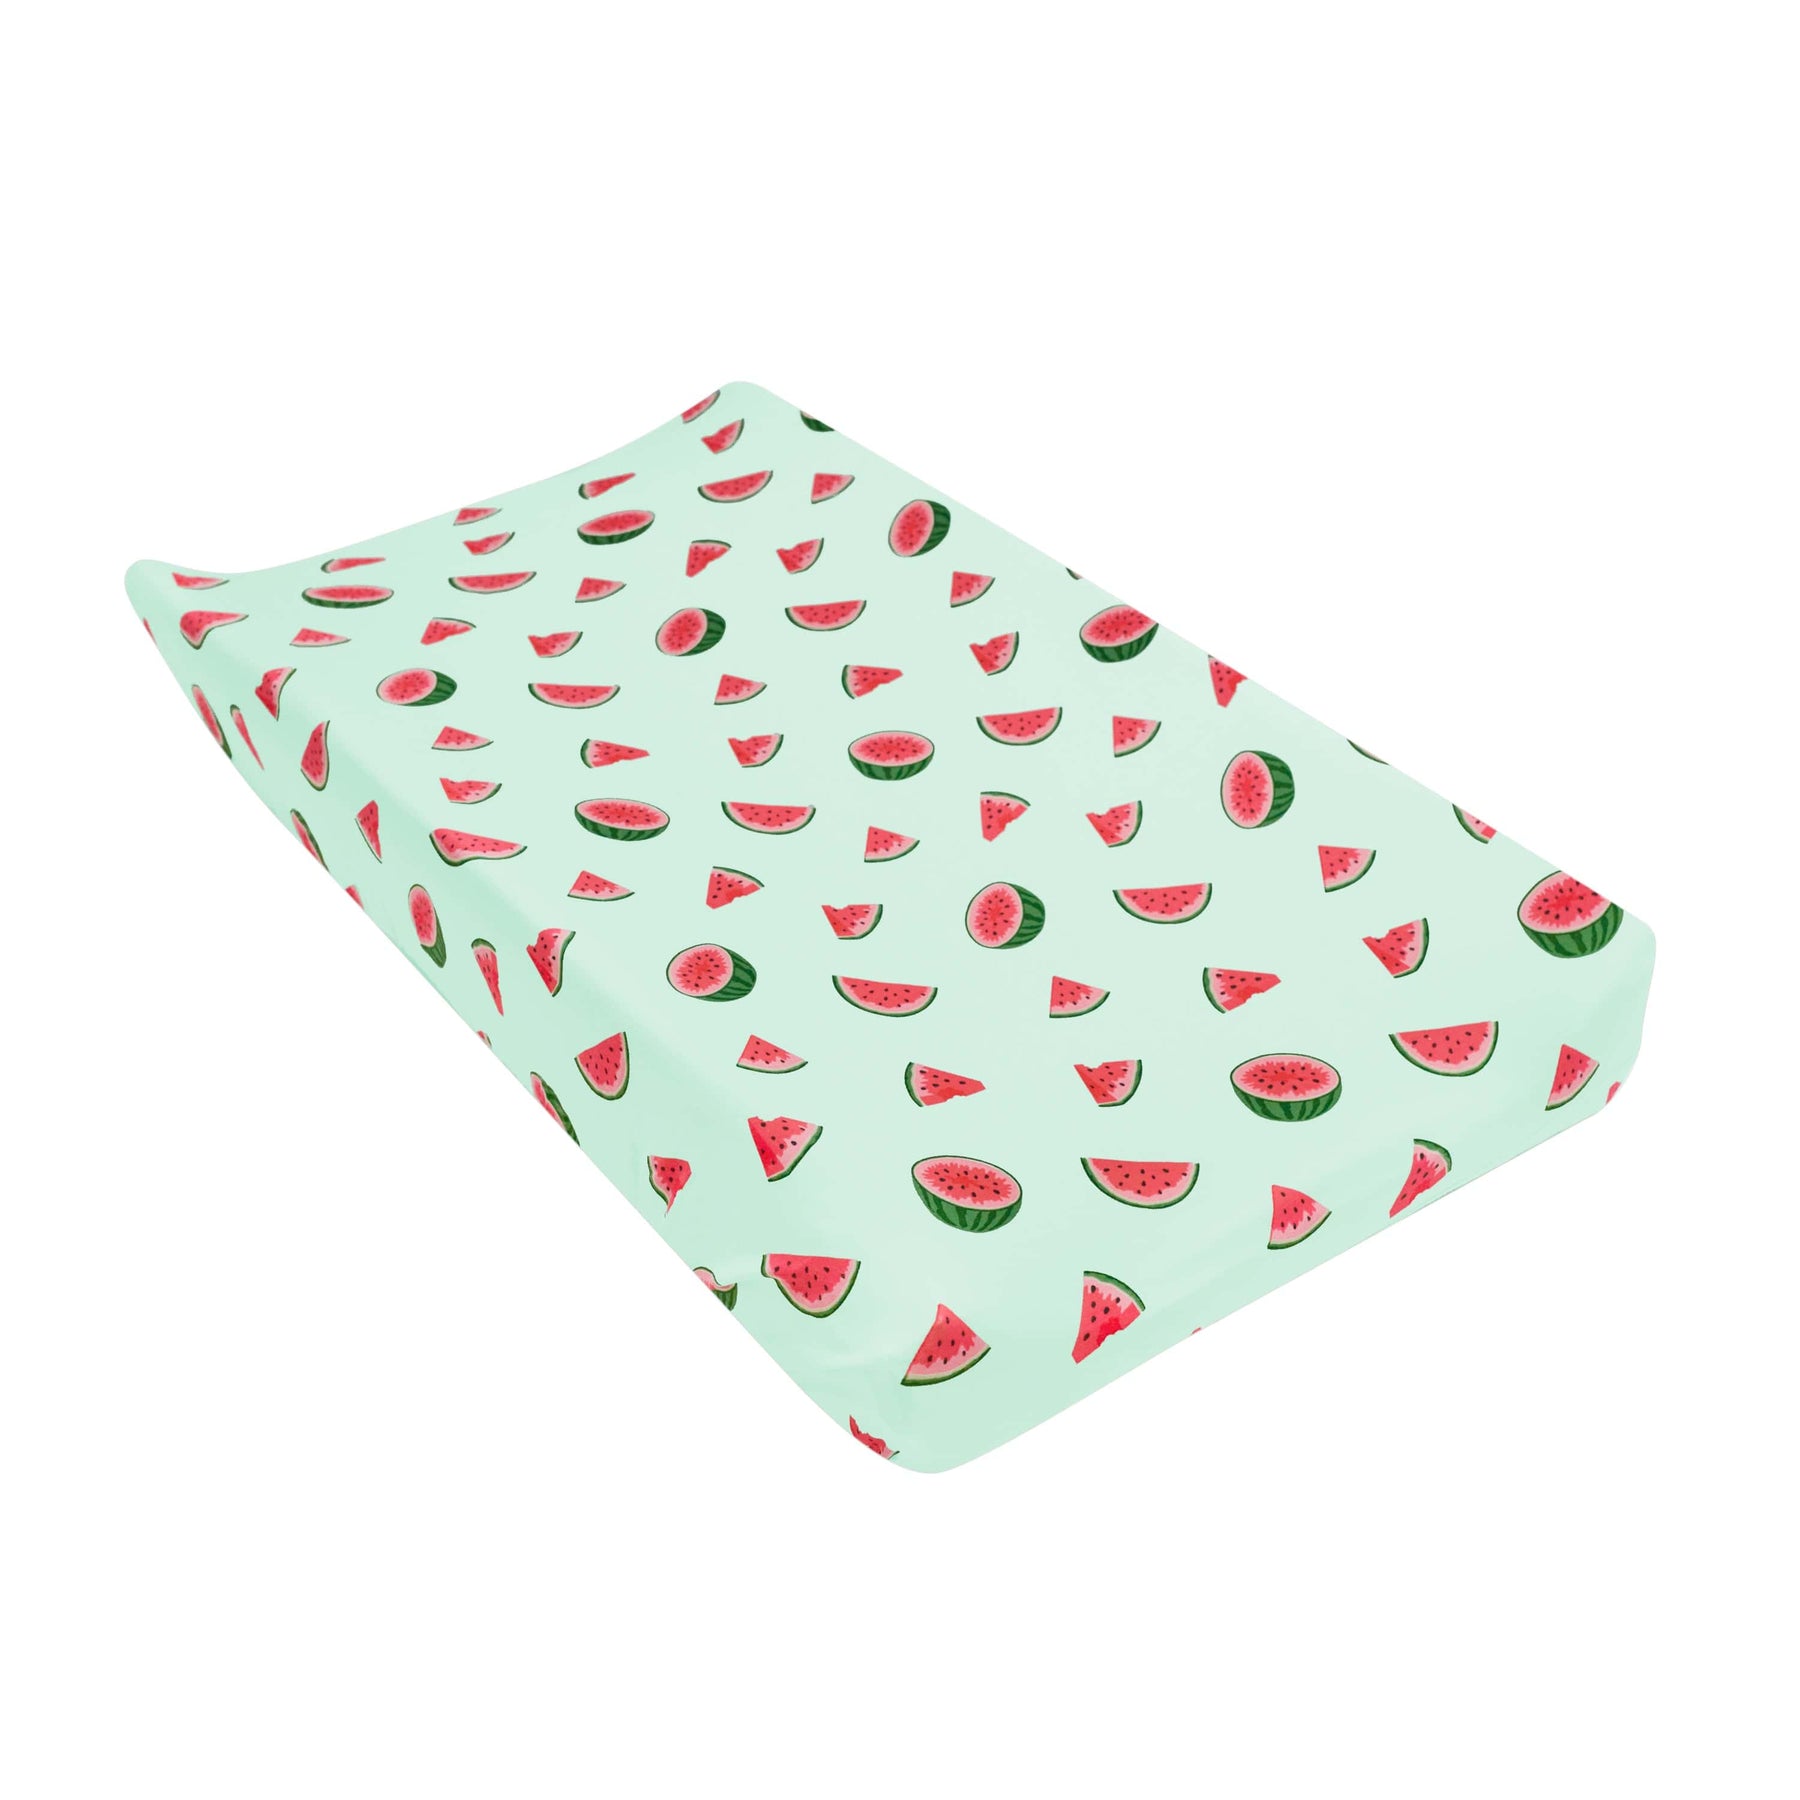 Kyte Baby Change Pad Cover Watermelon / One Size Change Pad Cover in Watermelon